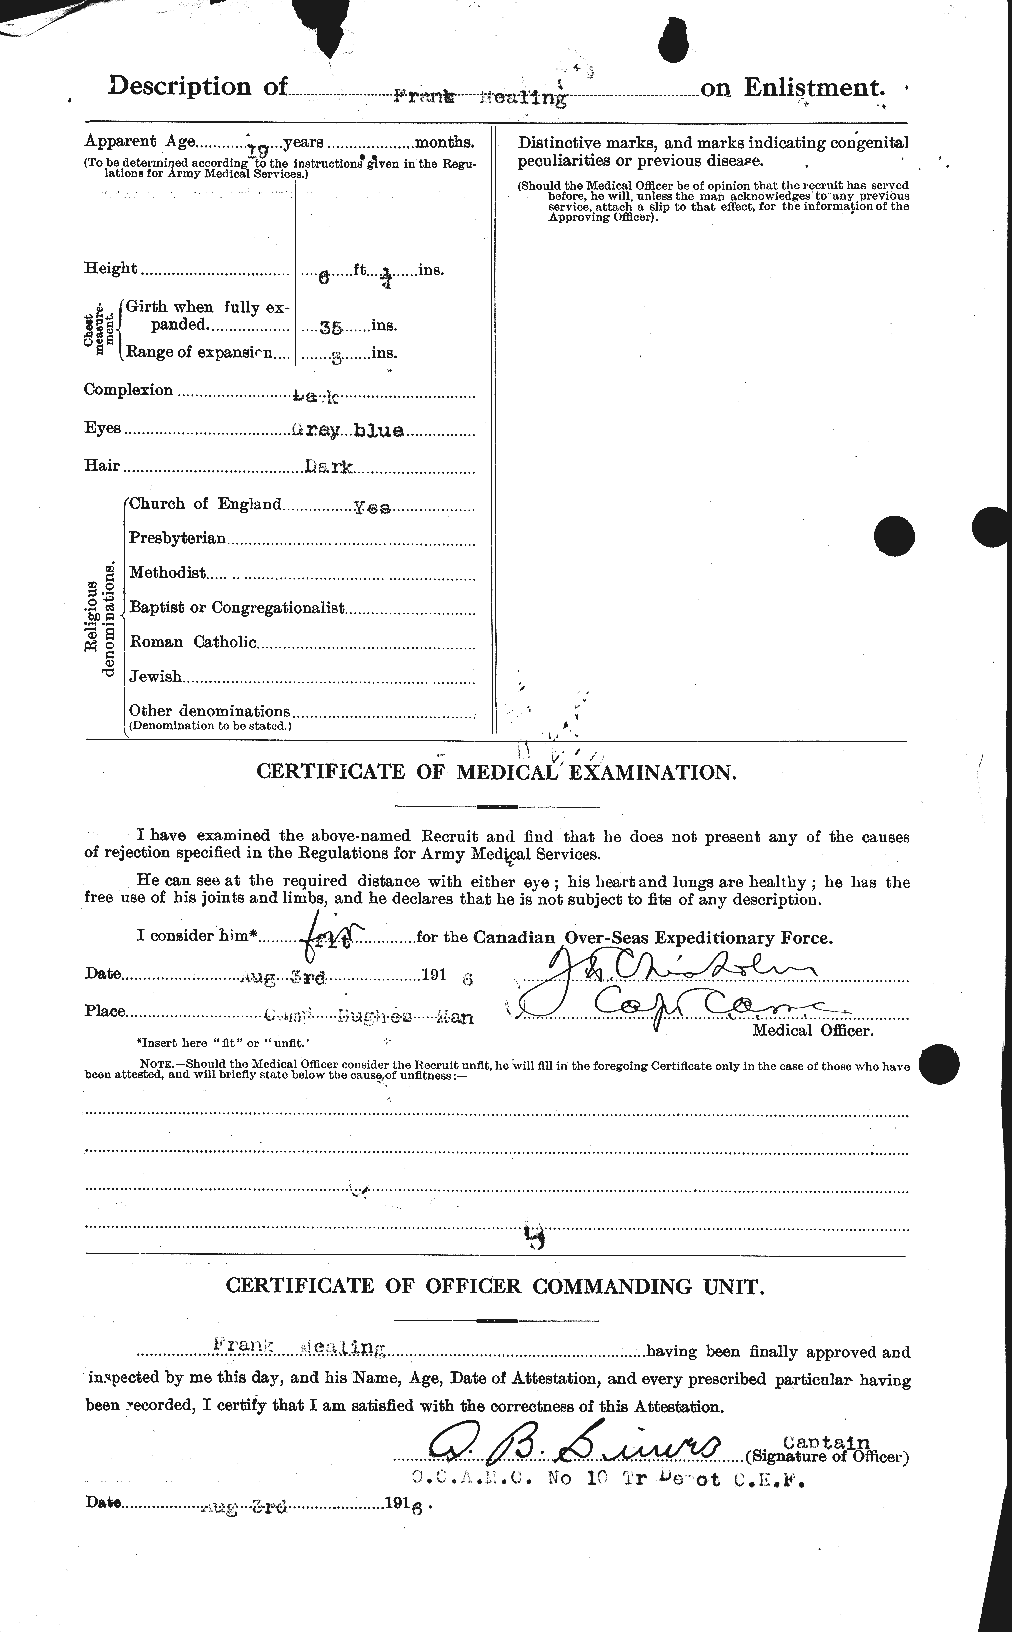 Personnel Records of the First World War - CEF 489622b